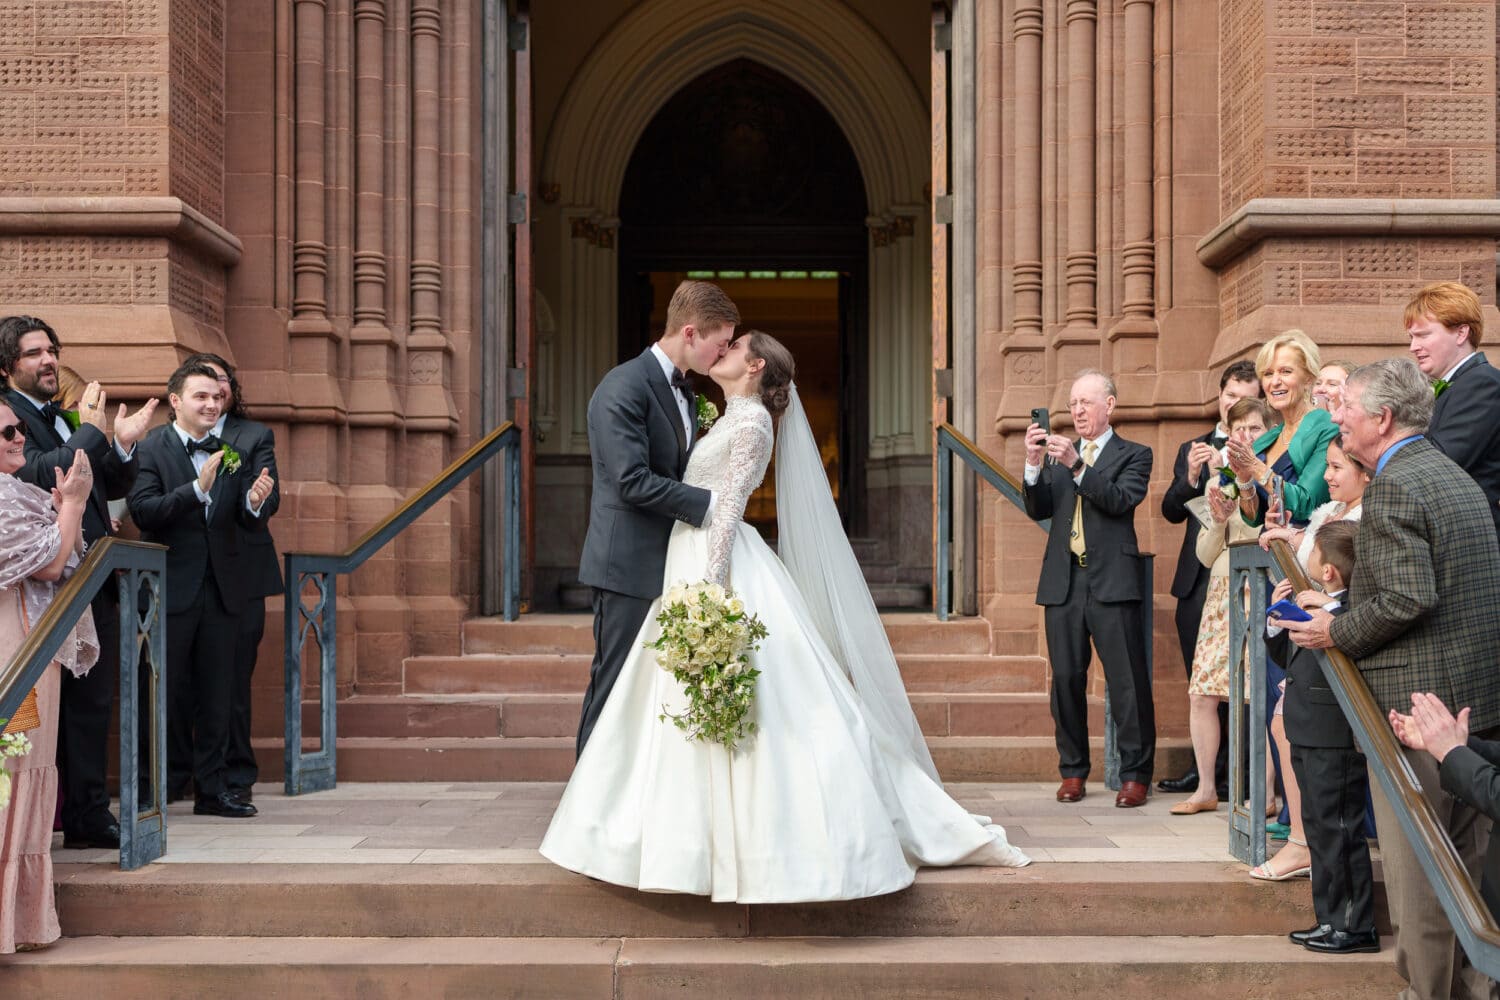 Kiss on the steps of the cathedral - Cathedral of Saint John Charleston